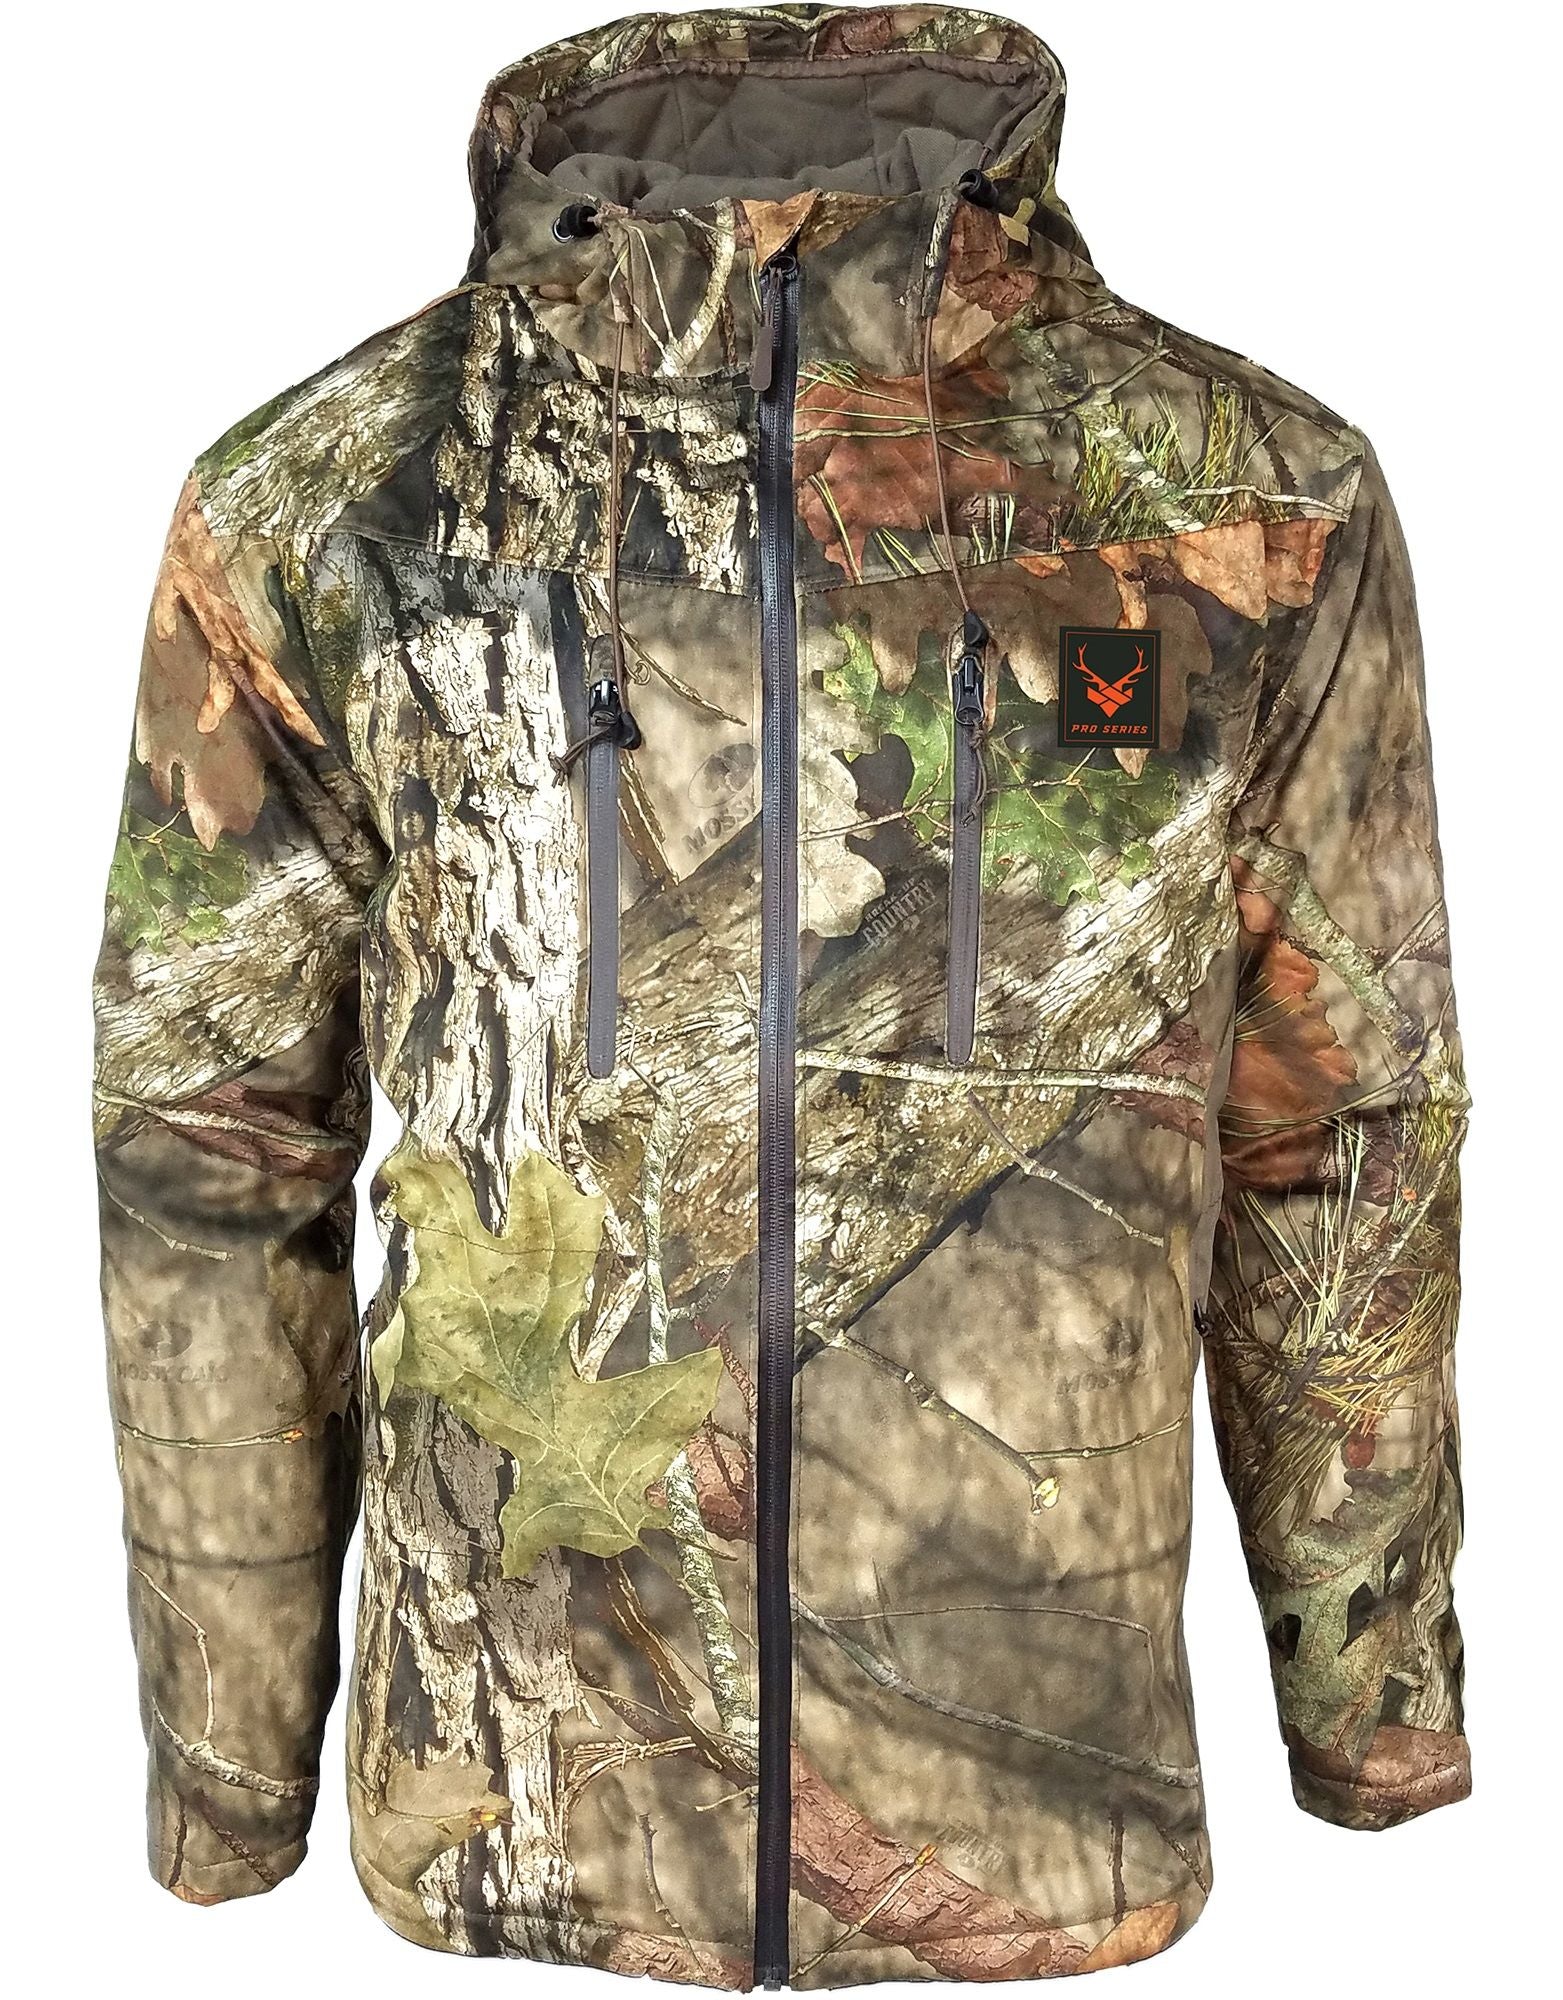 DIC-ZJ851 - Walls Mens Scentrex Silent Quest Insulated Parka